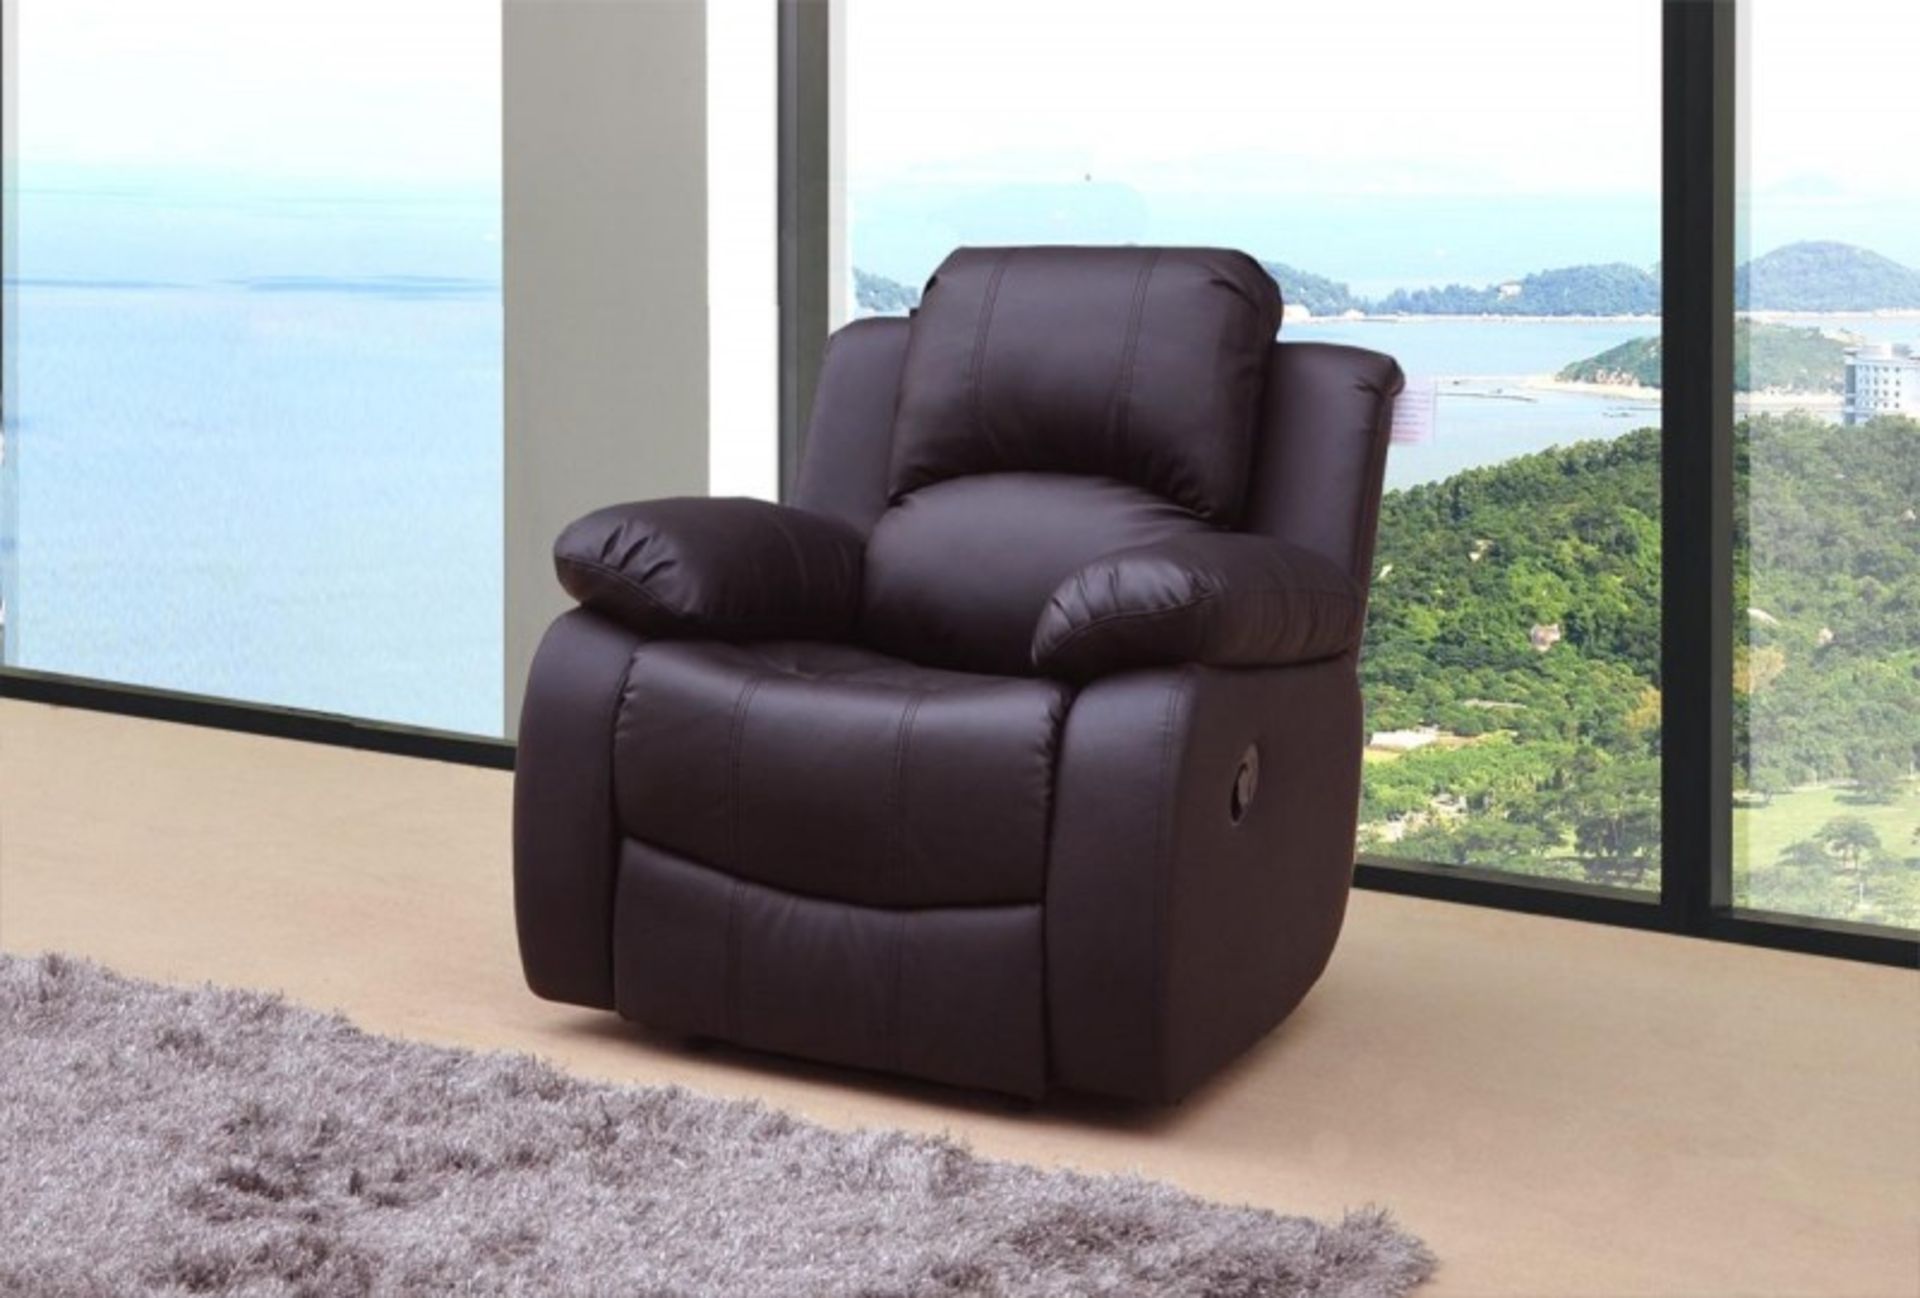 Brand new direct from the manufacturers brown leather electric supreme valance reclining chair